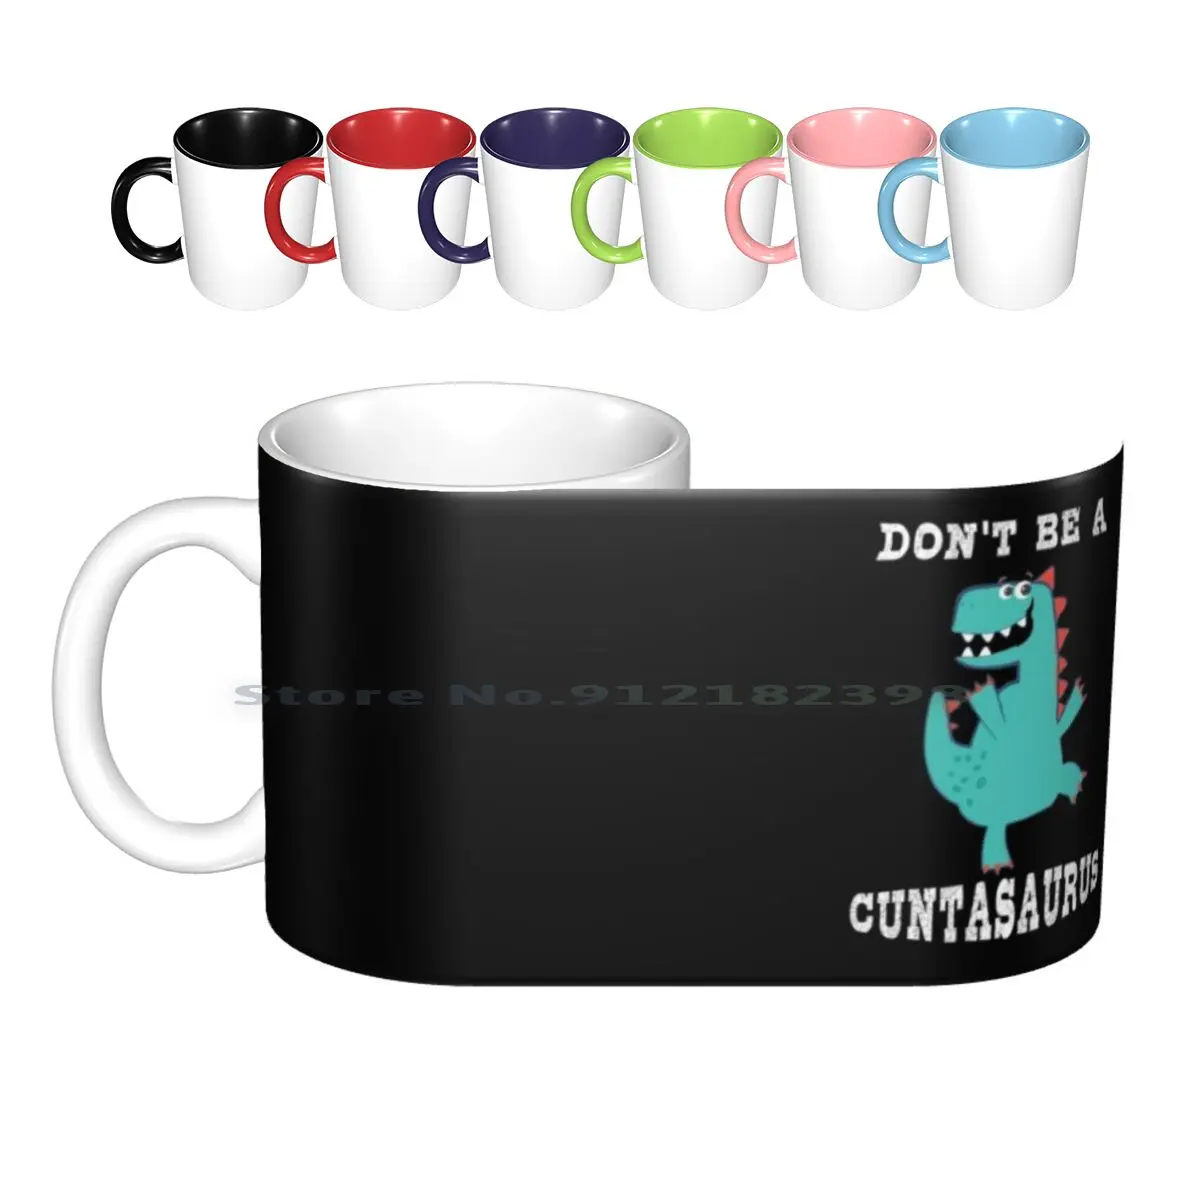 

Don't Be A Ceramic Mugs Coffee Cups Milk Tea Mug Dont Be A Dinosaur Dinosaurs Funny Silly Cute T Shir T Dont Be A Creative